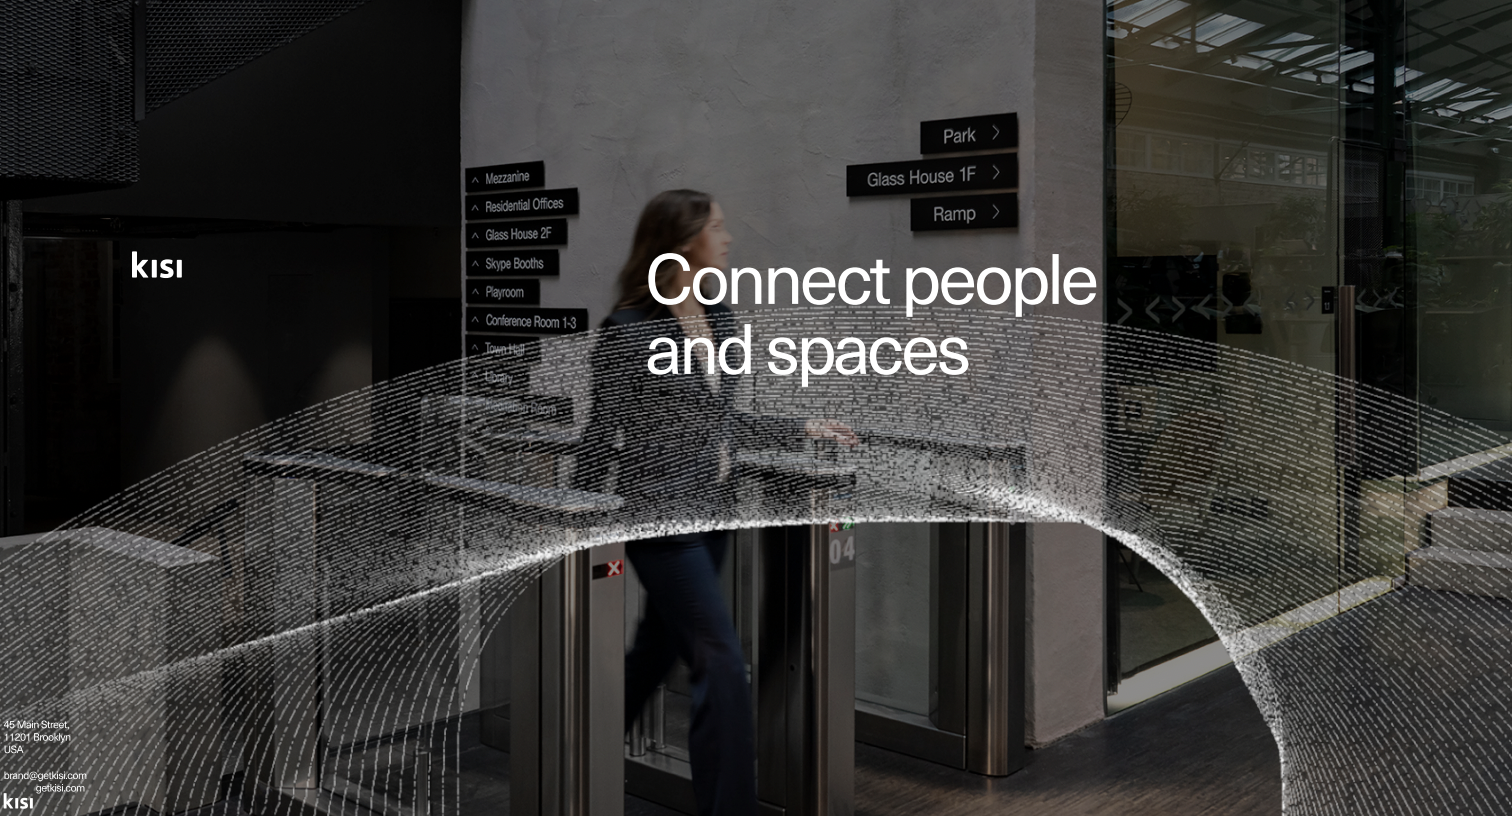 Kisi - Connect people and spaces